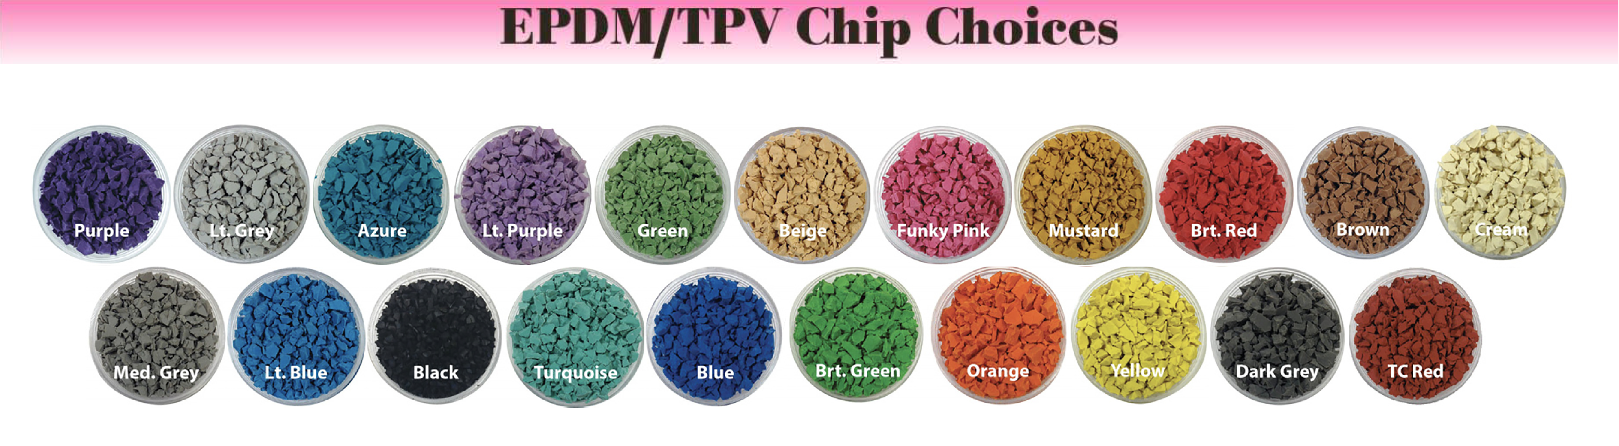 UNITY Showing the TPV Color Choices for 2020